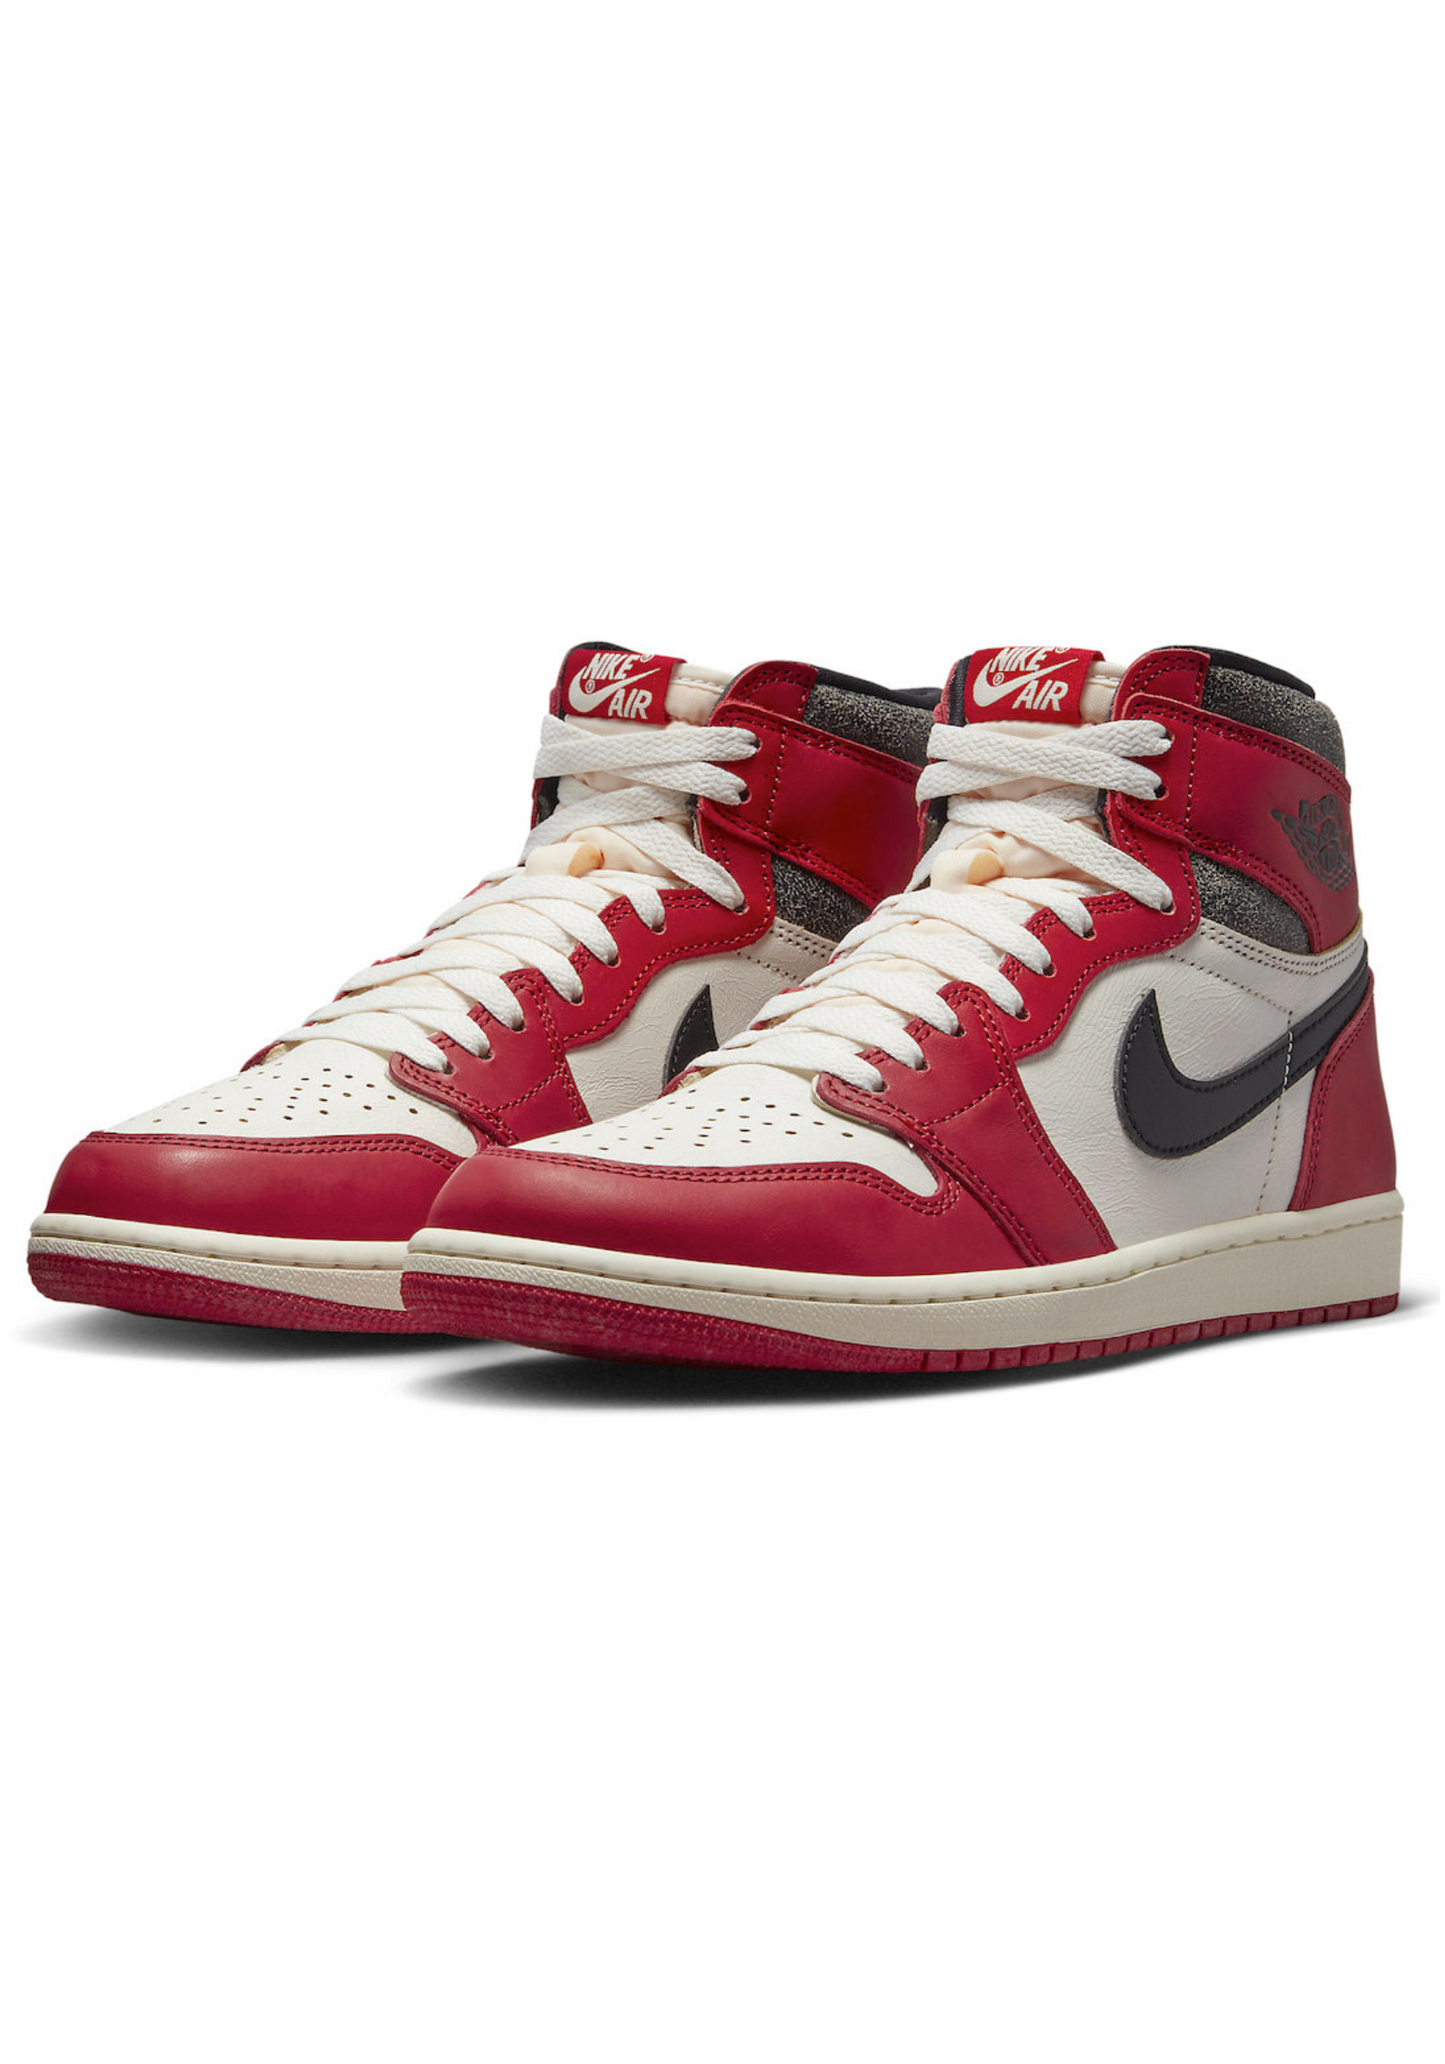 NIKE AIR JORDAN 1 RETRO HIGH OG CHICAGO LOST AND FOUND (GS